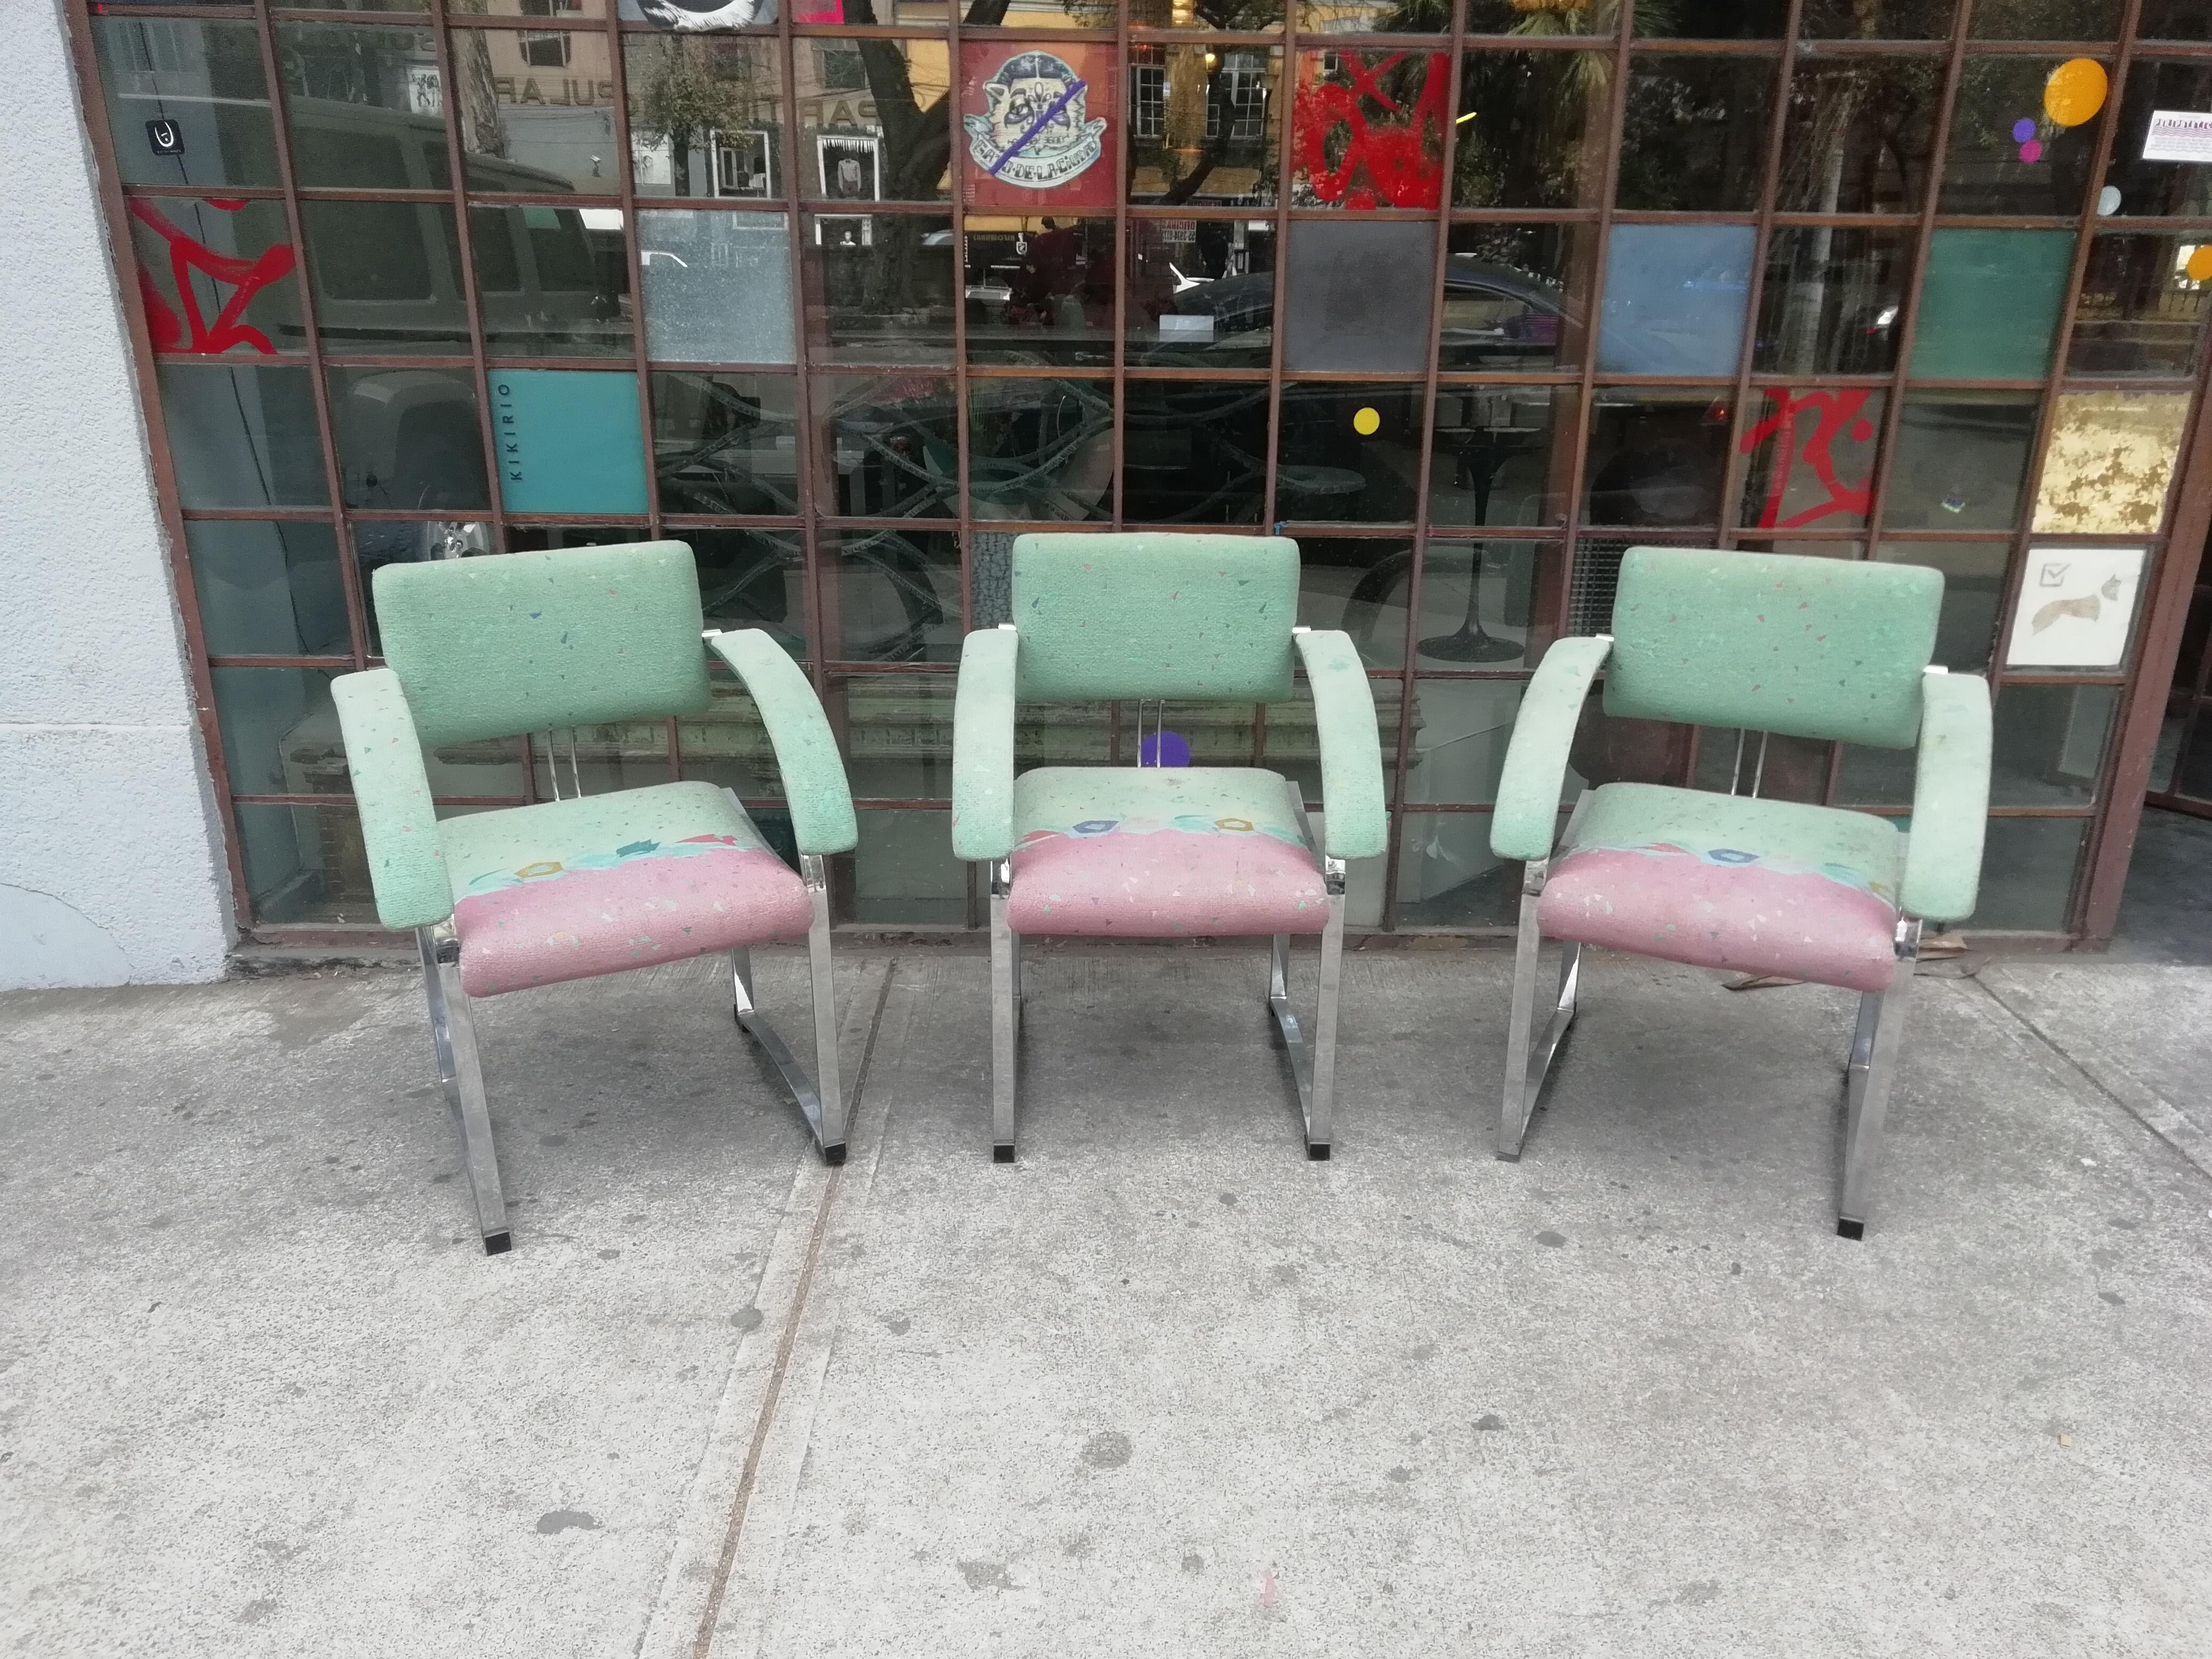 A rare set of 6 chromed steel armchairs by Saporiti Italia. With original upholstery in aqua blue, pink and coral colors. Sold in current vintage condition.